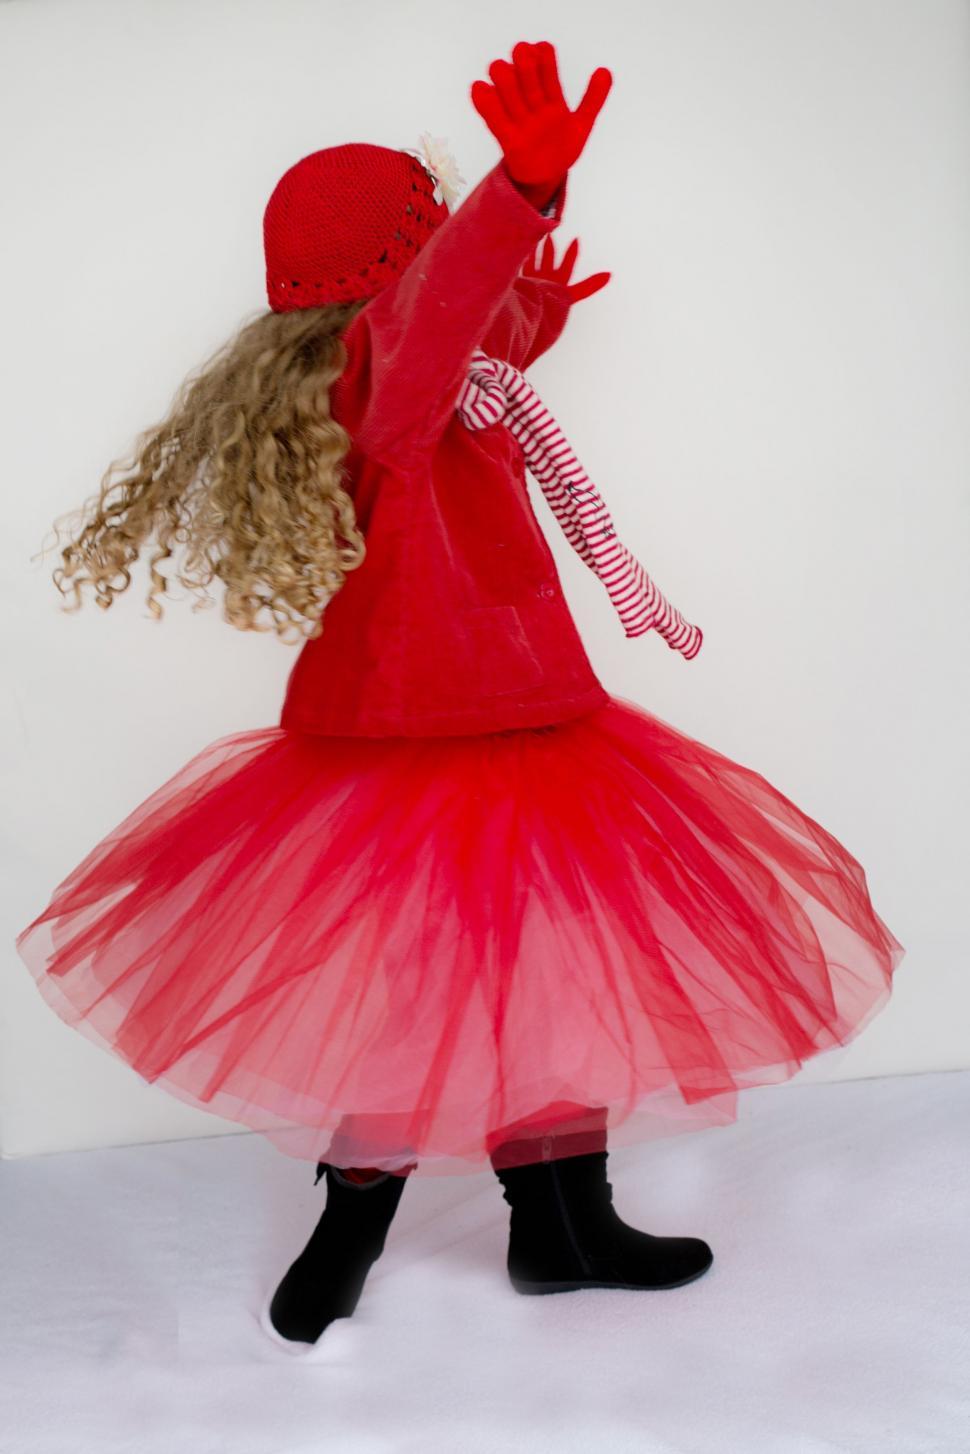 Free Image of Little girl in knitted red cap with red gloves dancing on white background 